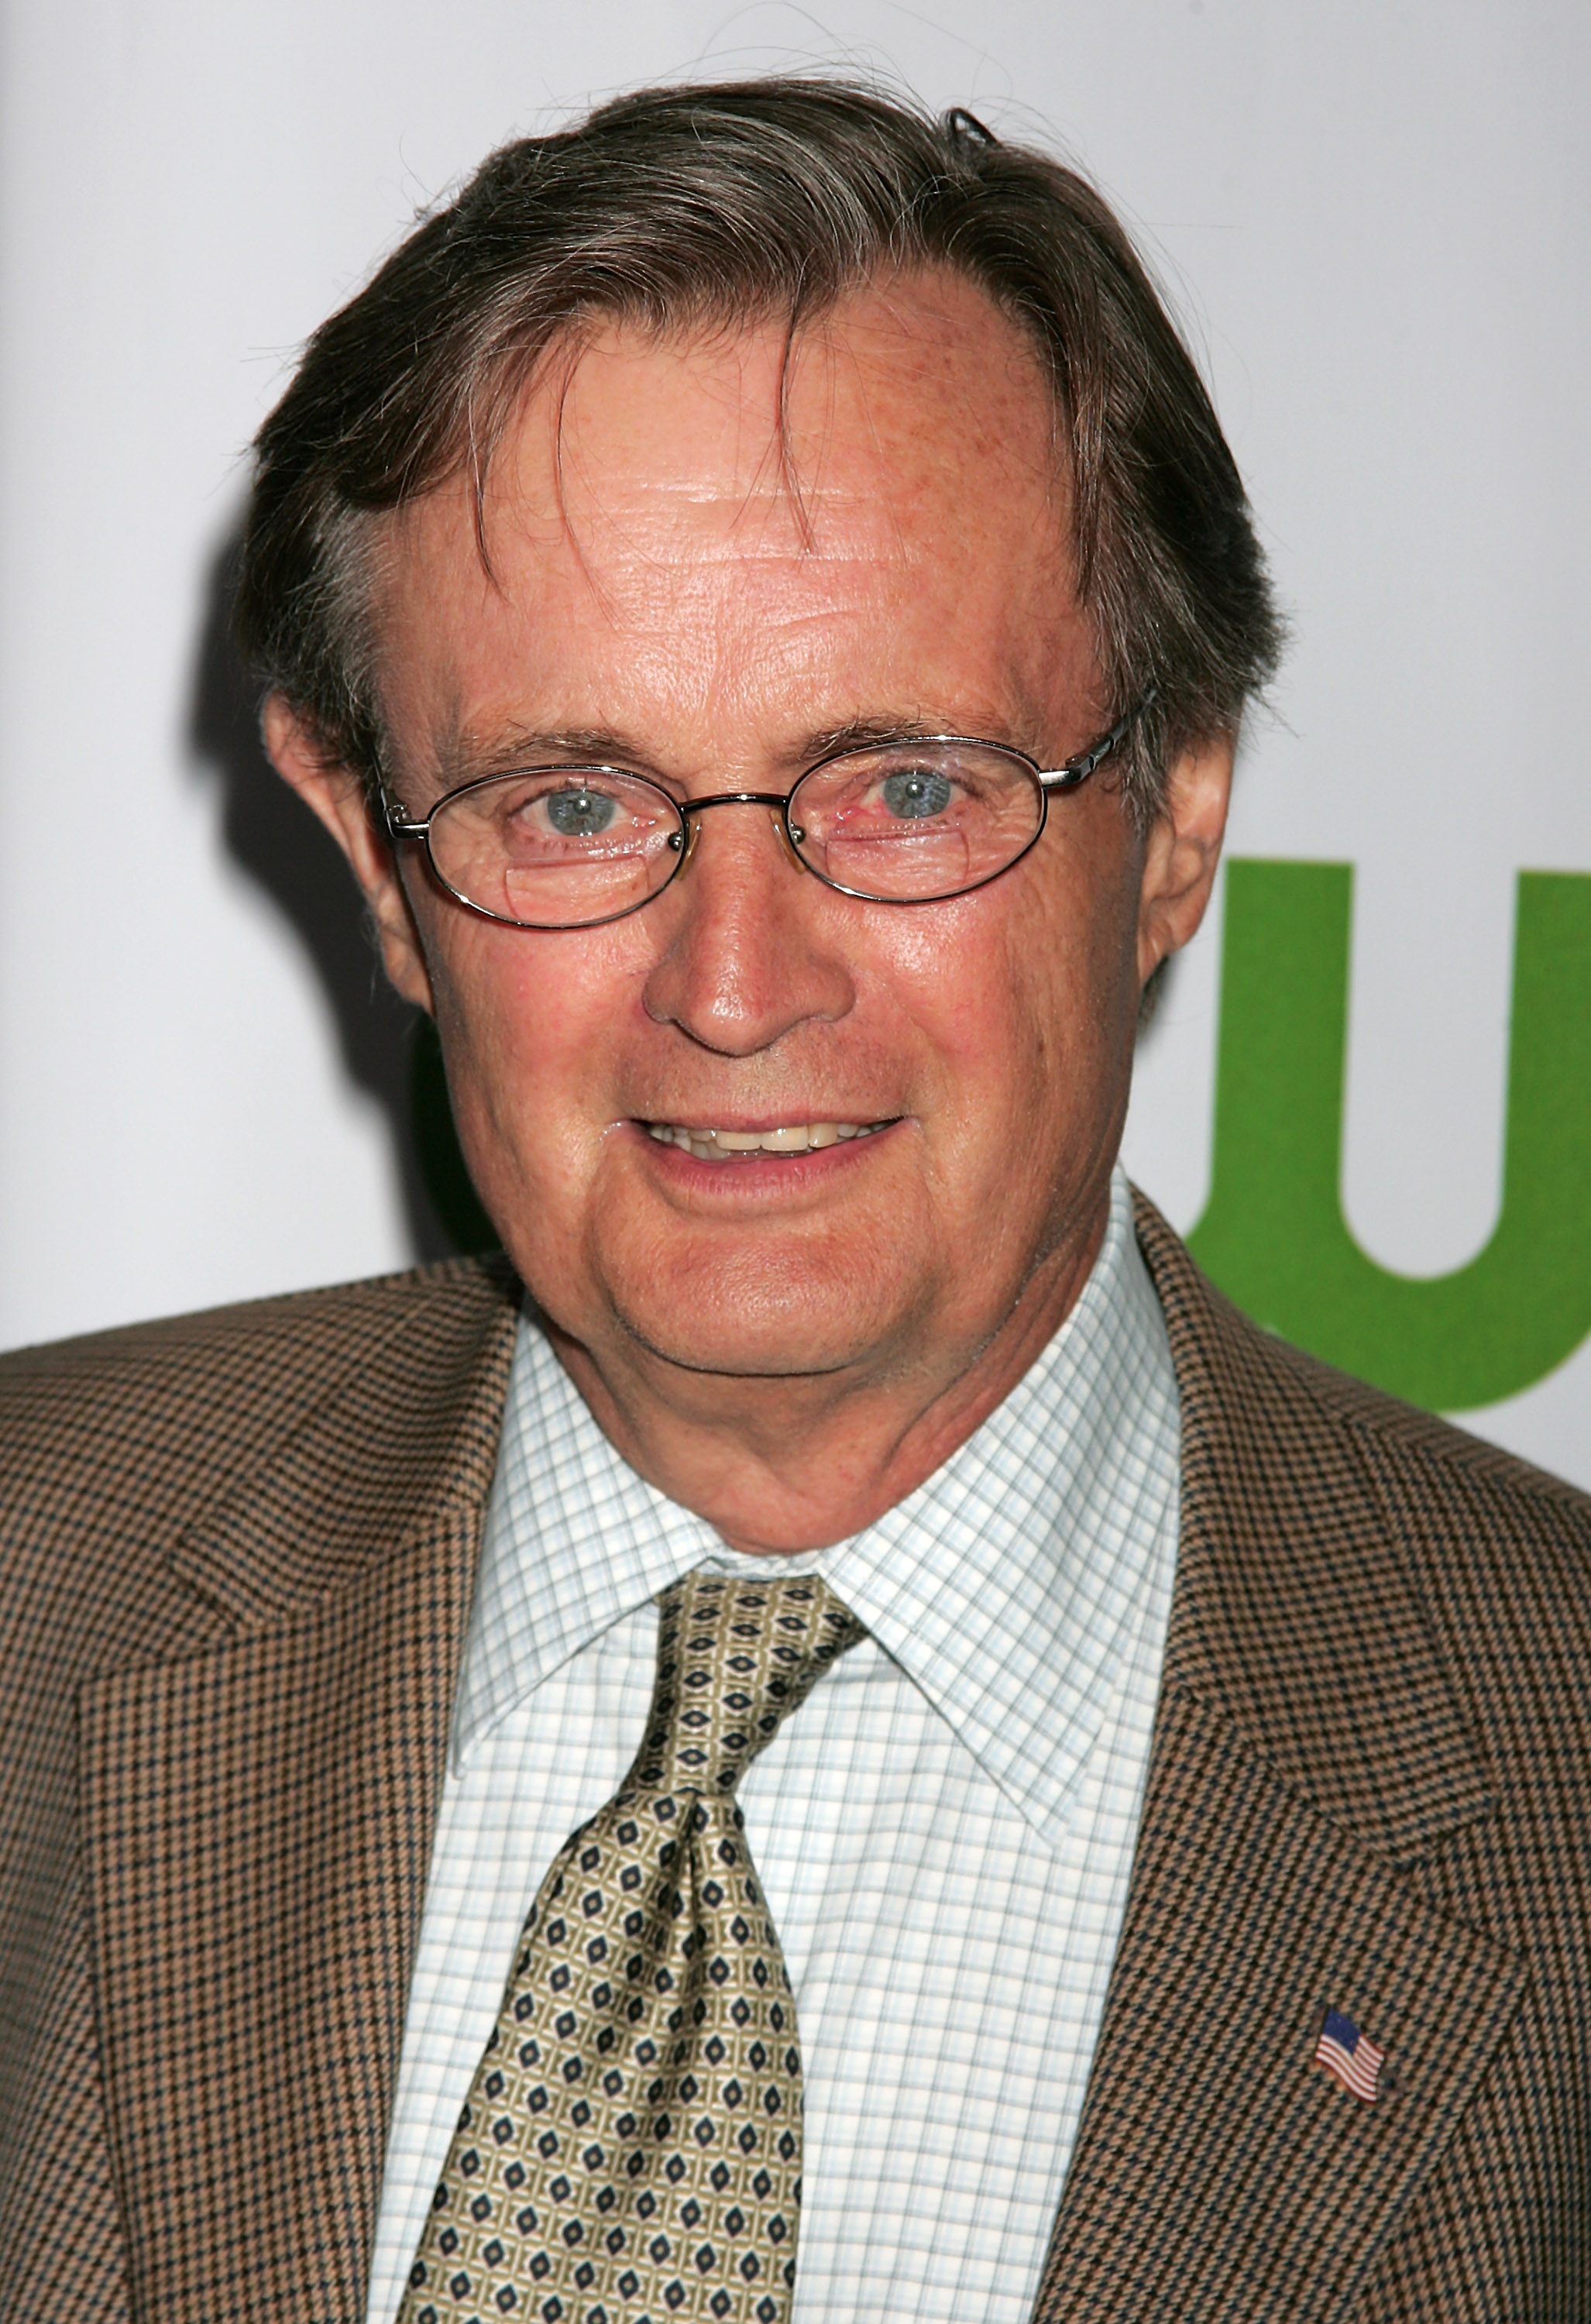 David McCallum attends the CW/CBS/Showtime/CBS Television TCA party at Boulevard3 on July 18, 2008, in Hollywood, California.  | Source: Getty Images